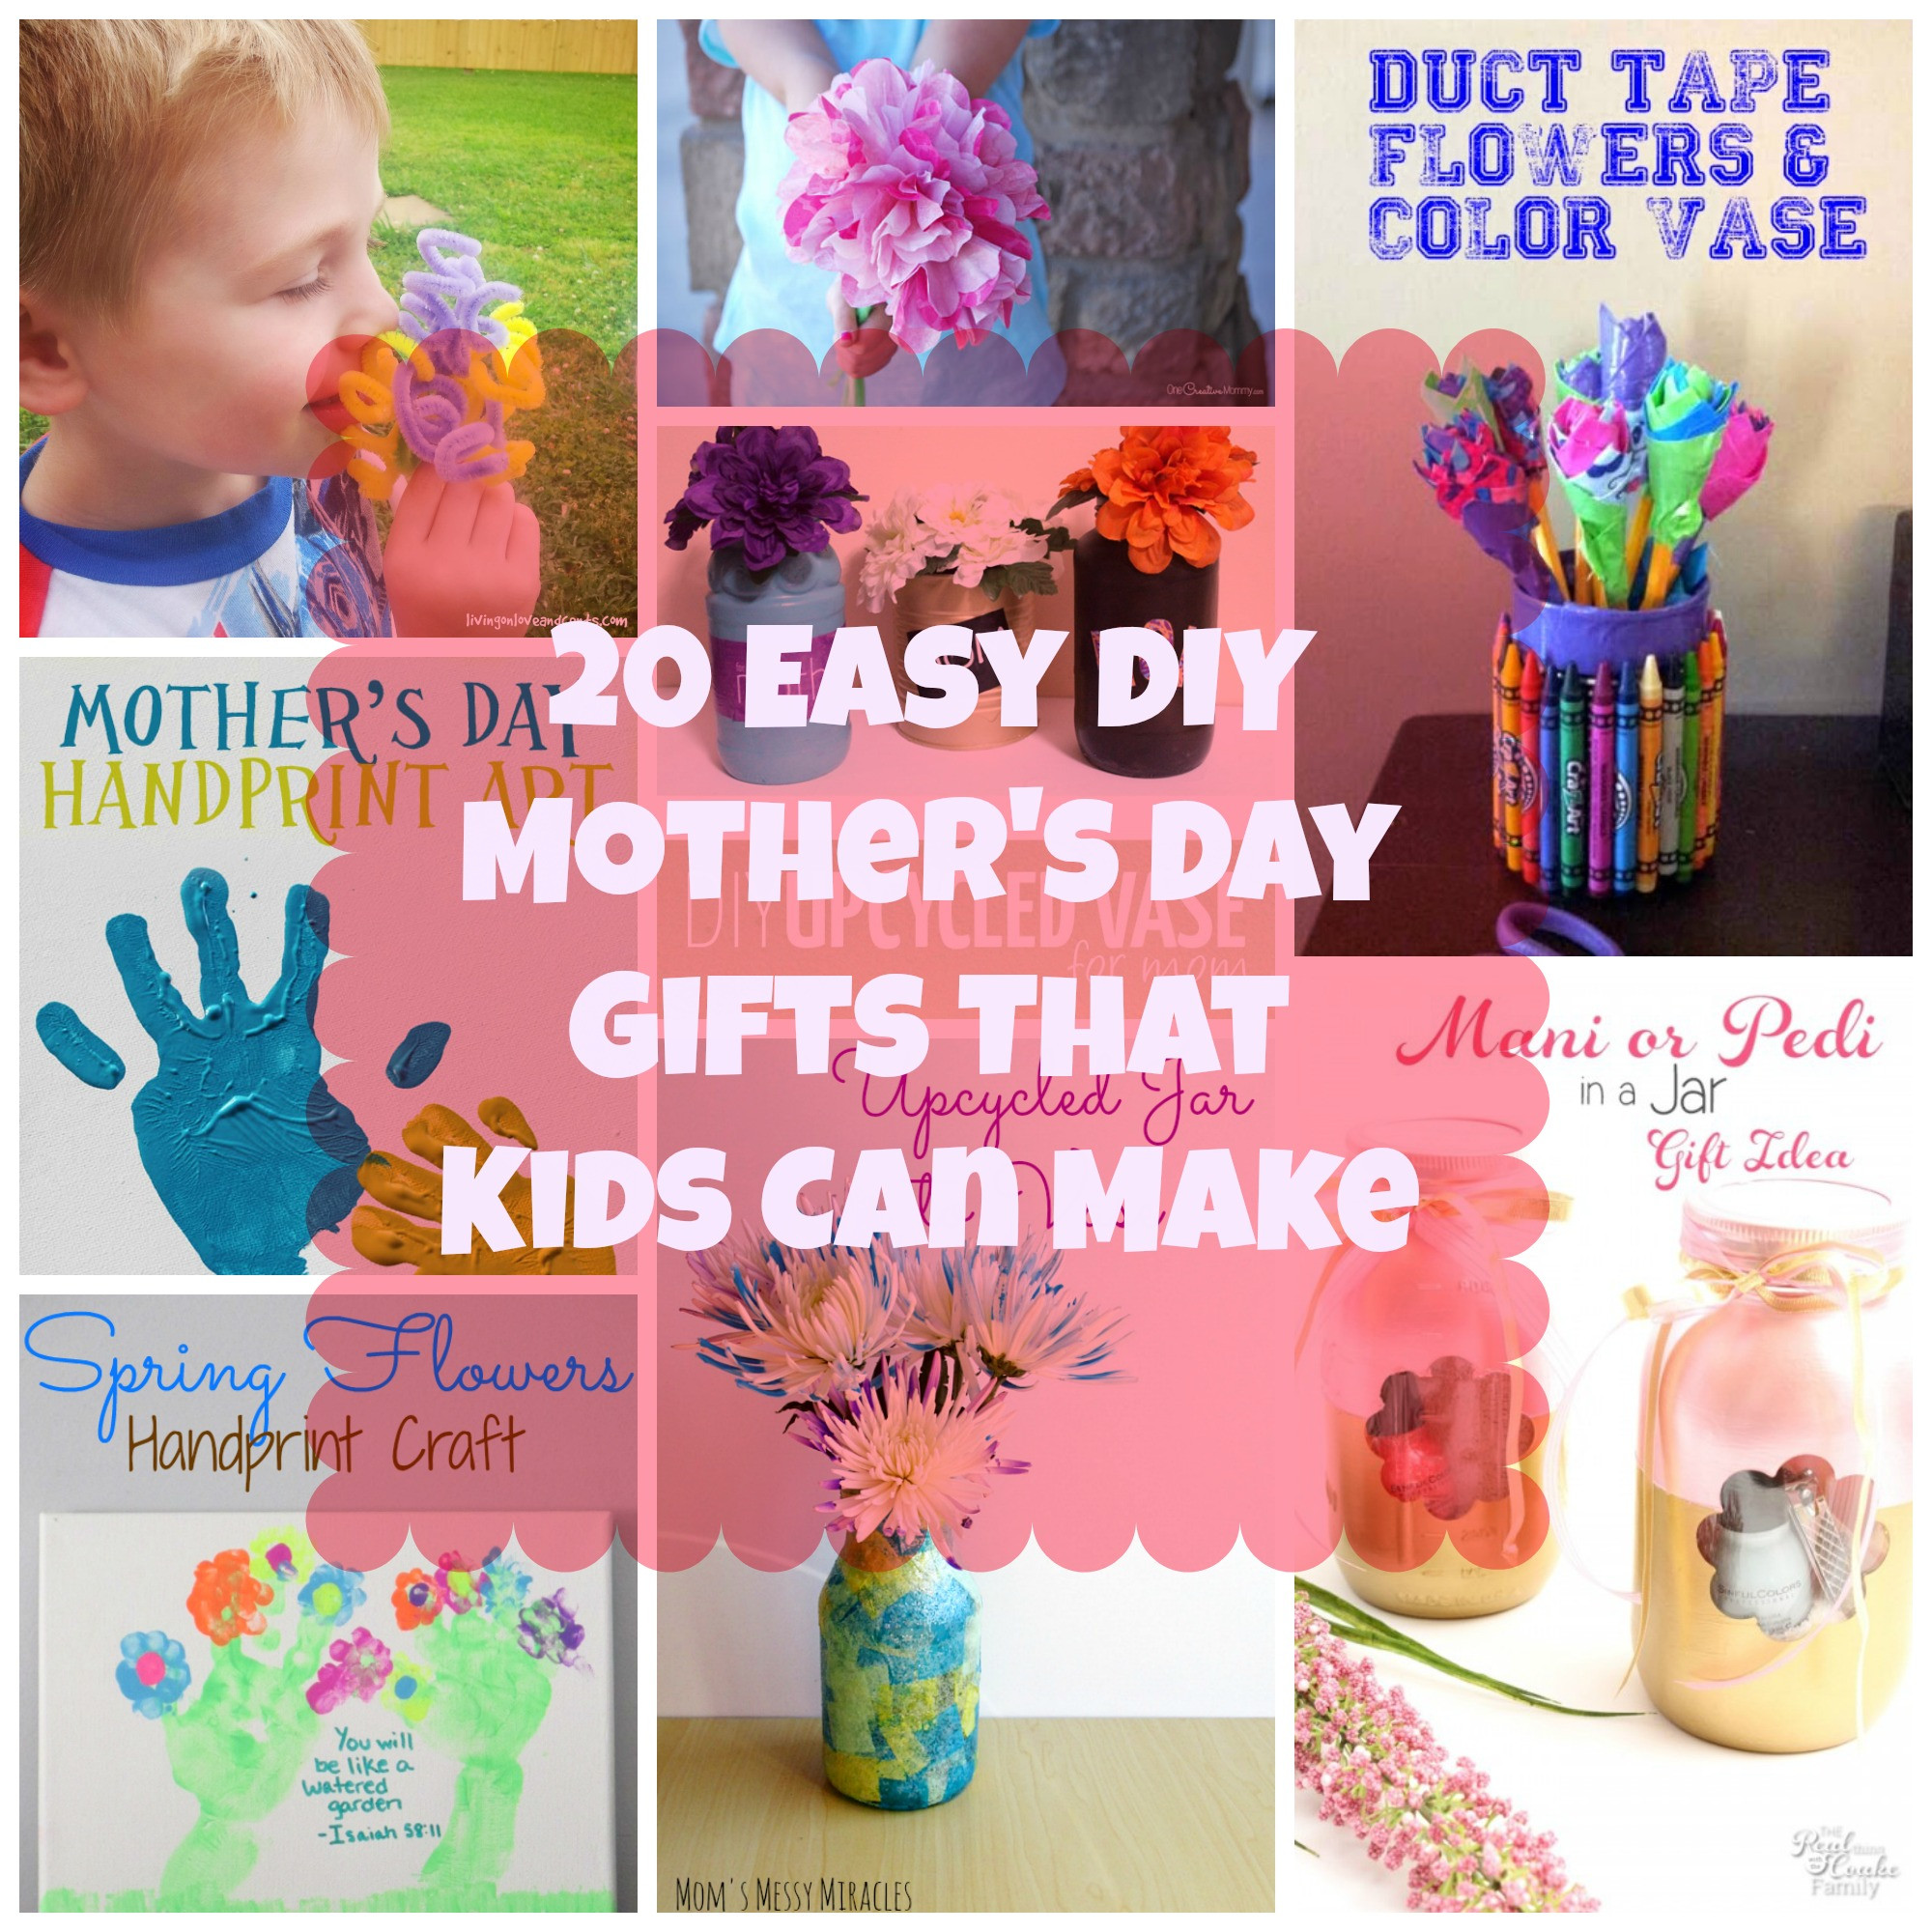 DIY Mothers Day Gifts Easy
 20 Easy DIY Mother s Day Gifts That Kids Can Make